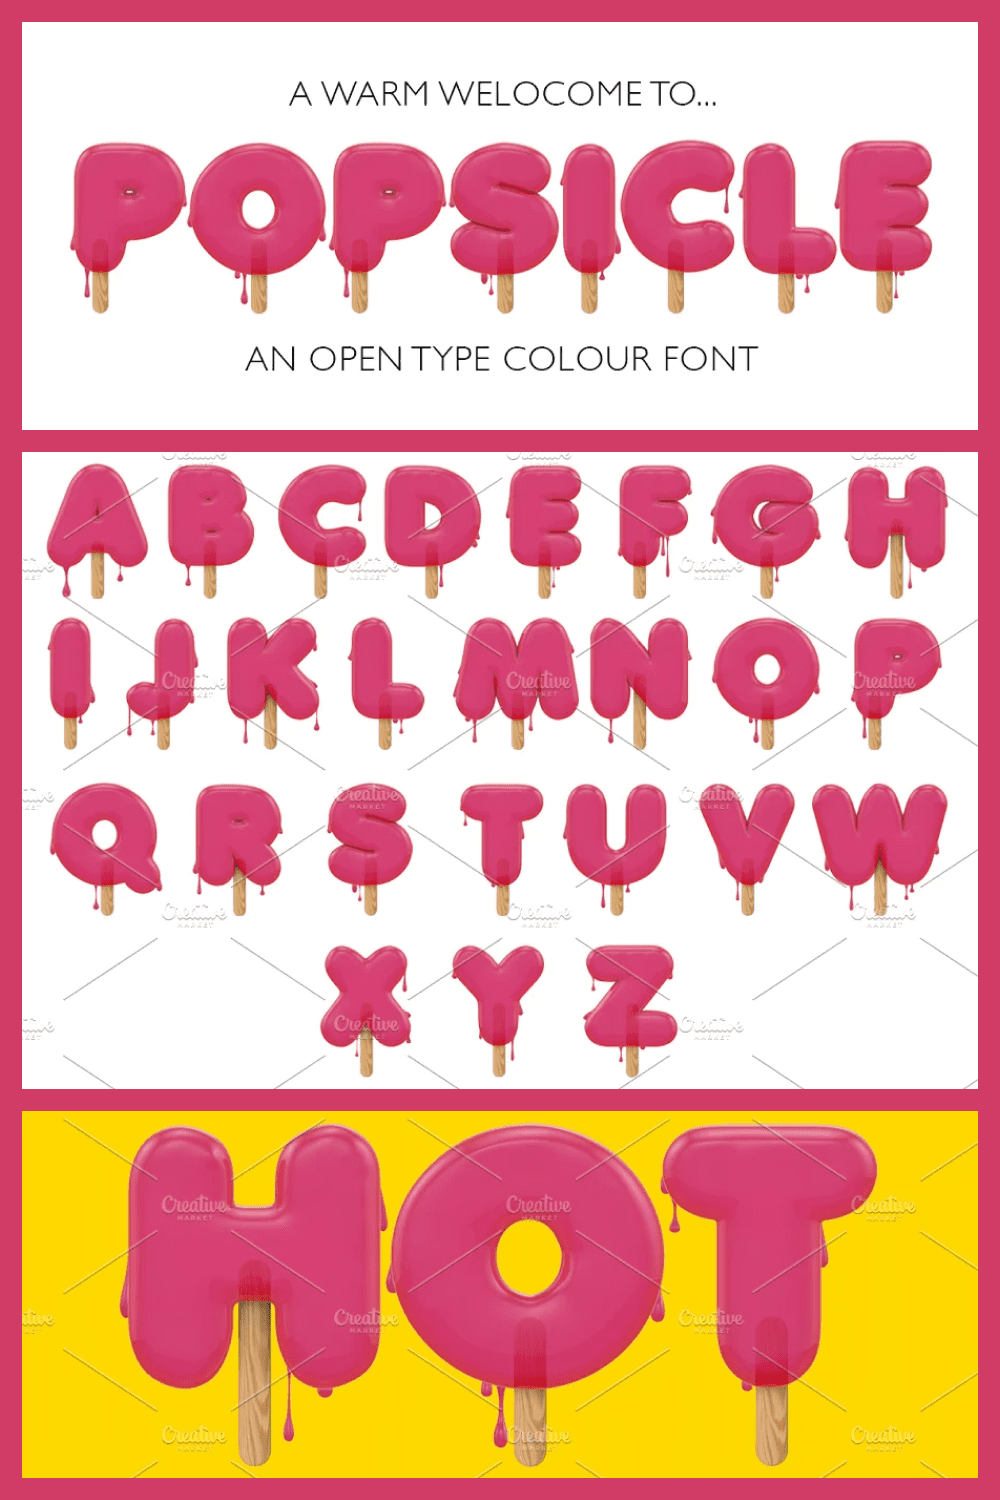 Summer is here and so is my new font POPSICLE a melting ice lolly font made from high quality 3D rendered images. Perfect for bold headers, summer party posters and invitations.